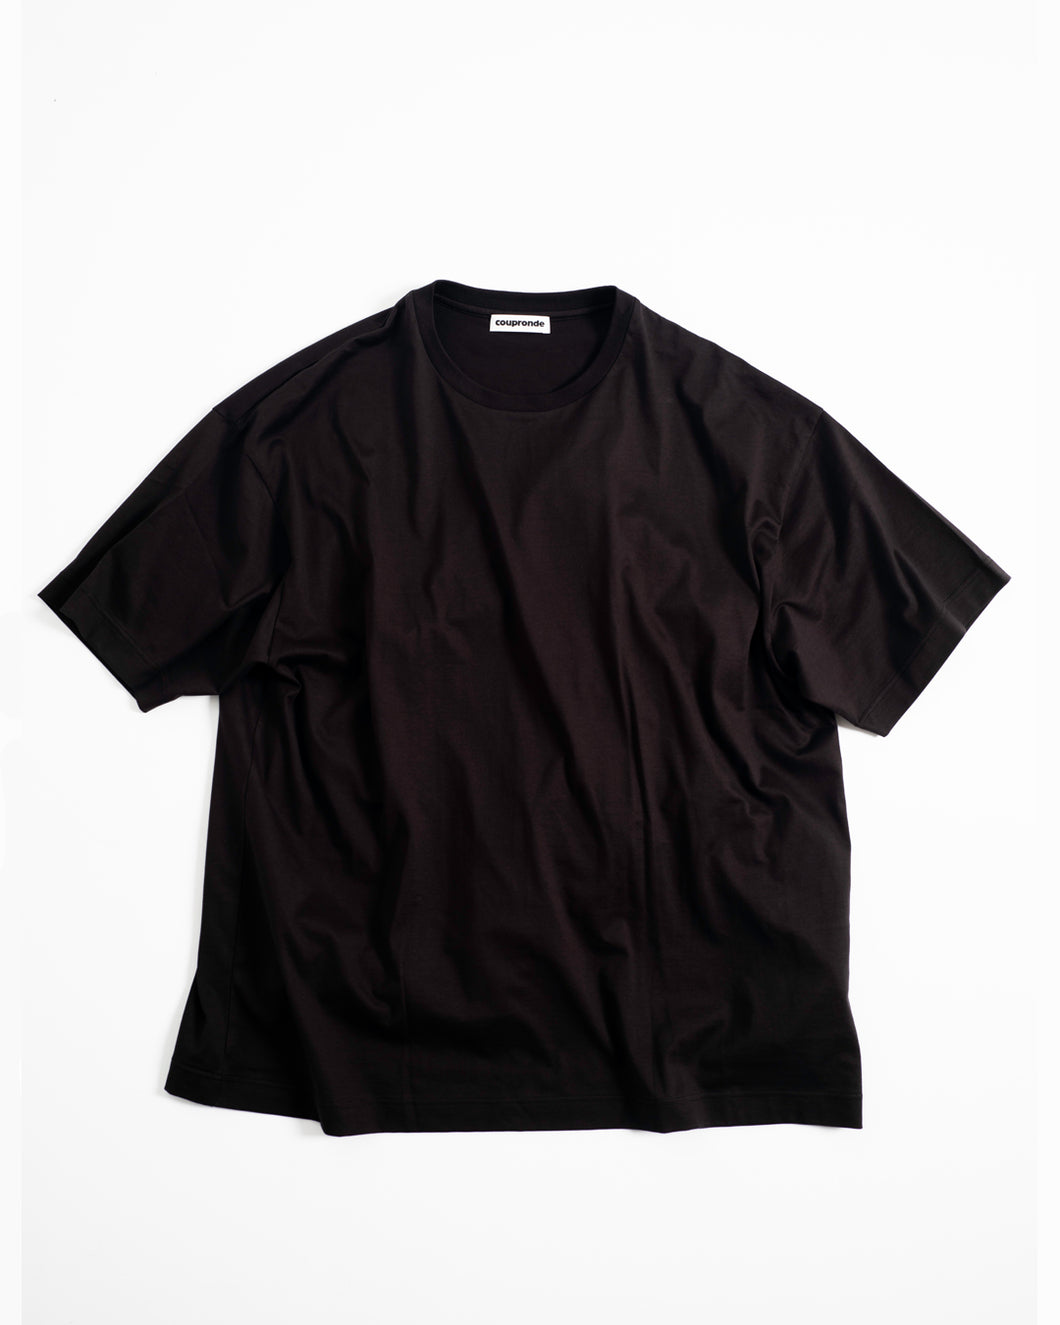 SHORT SLEEVE 2 CHARCOAL BROWN